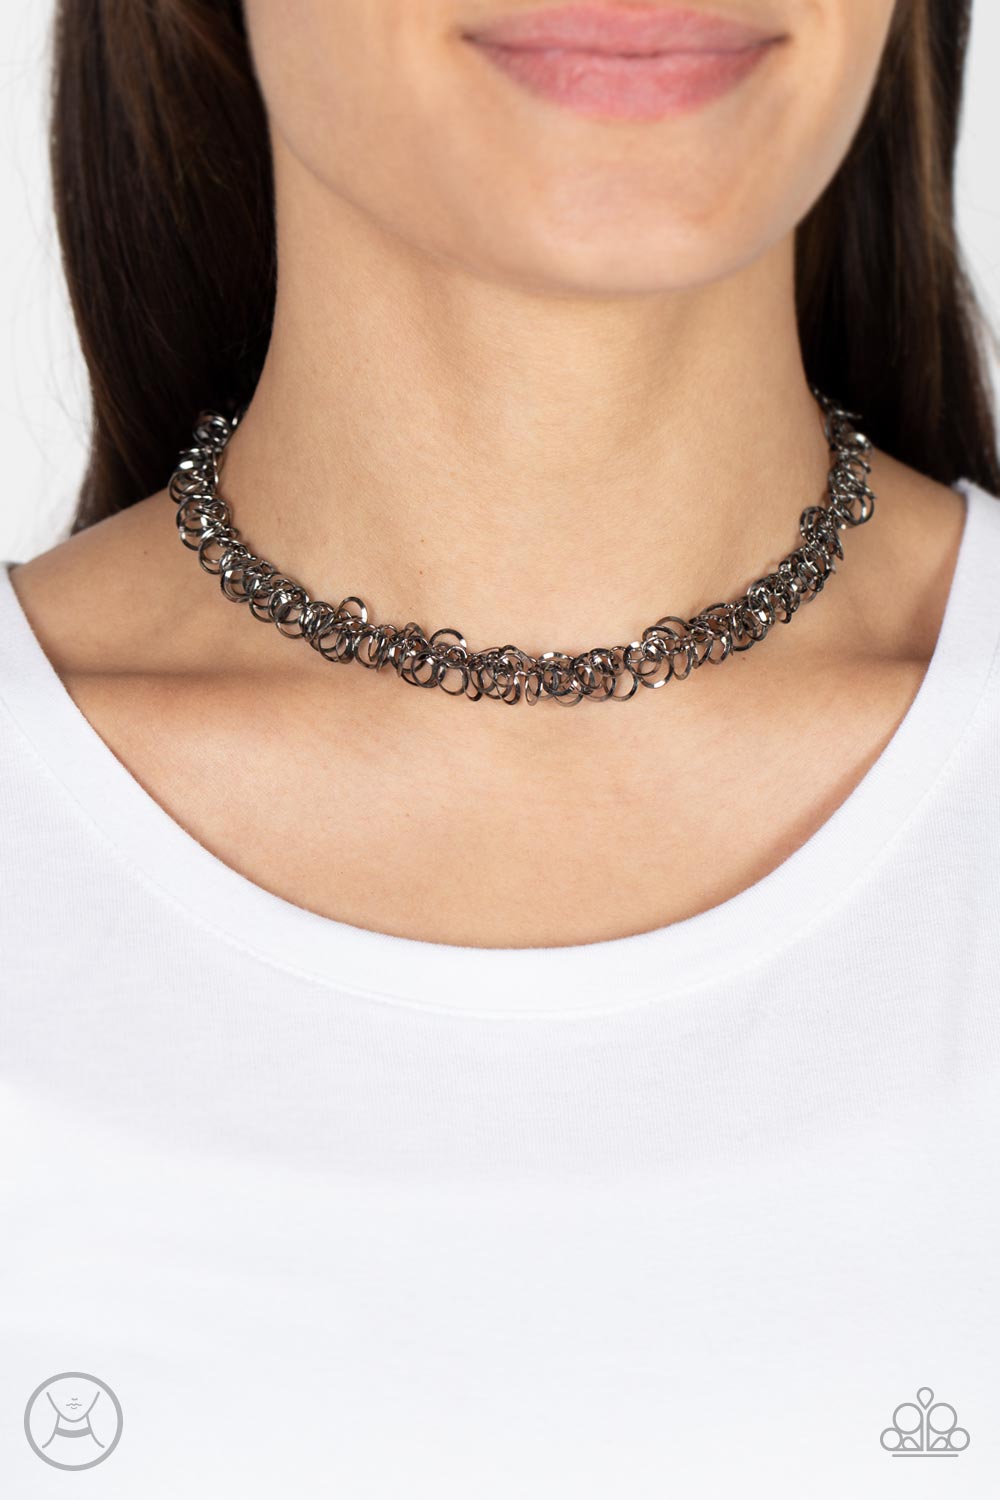 Cause a Commotion Gunmetal Black Choker Necklace - Paparazzi Accessories-on model - CarasShop.com - $5 Jewelry by Cara Jewels